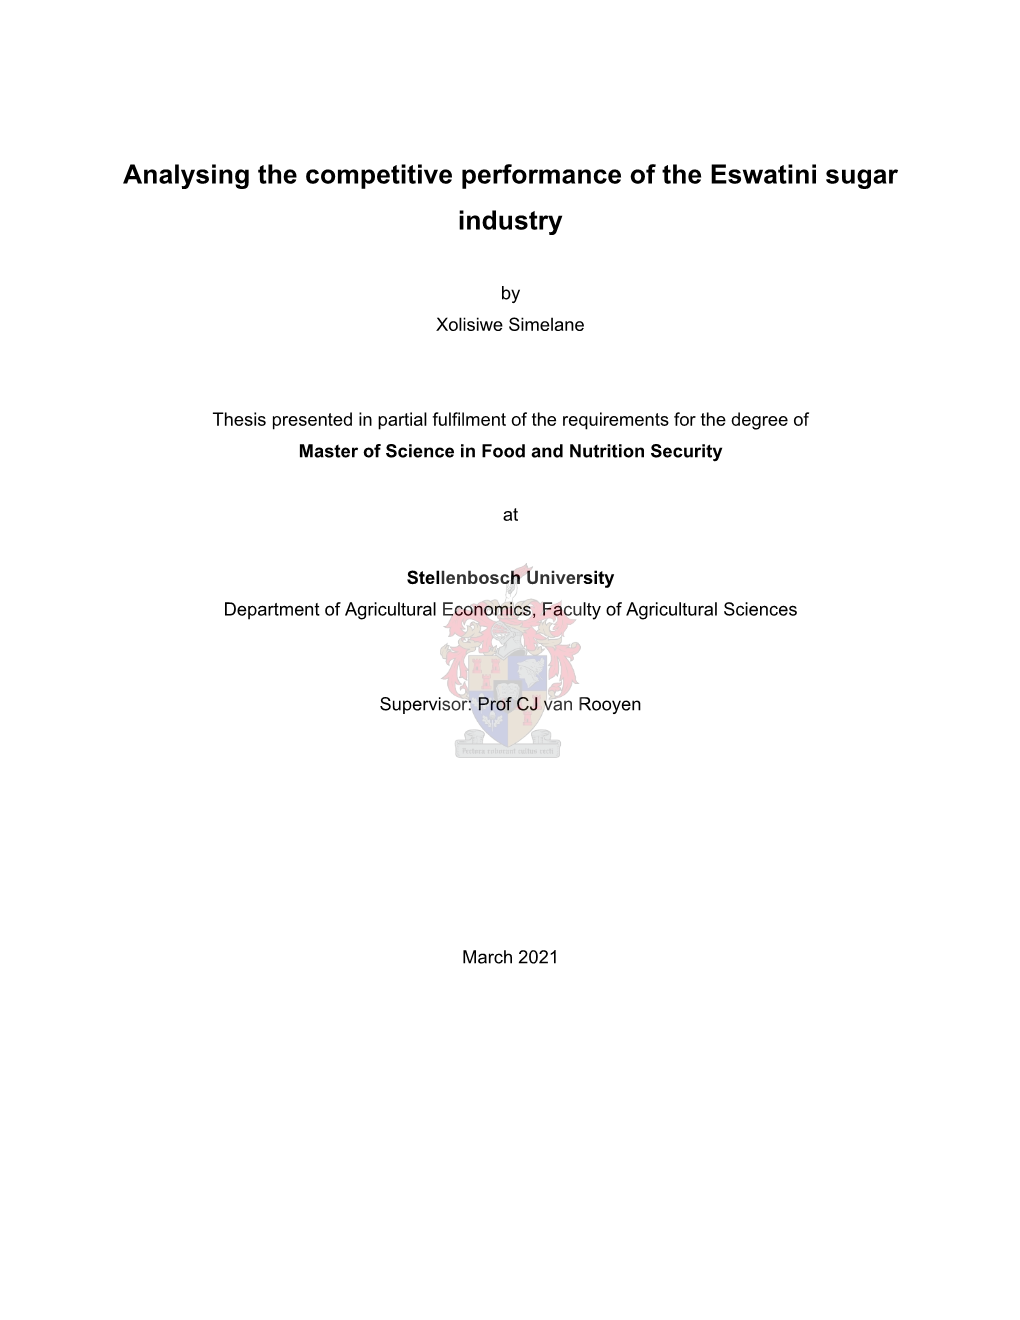 Analysing the Competitive Performance of the Eswatini Sugar Industry